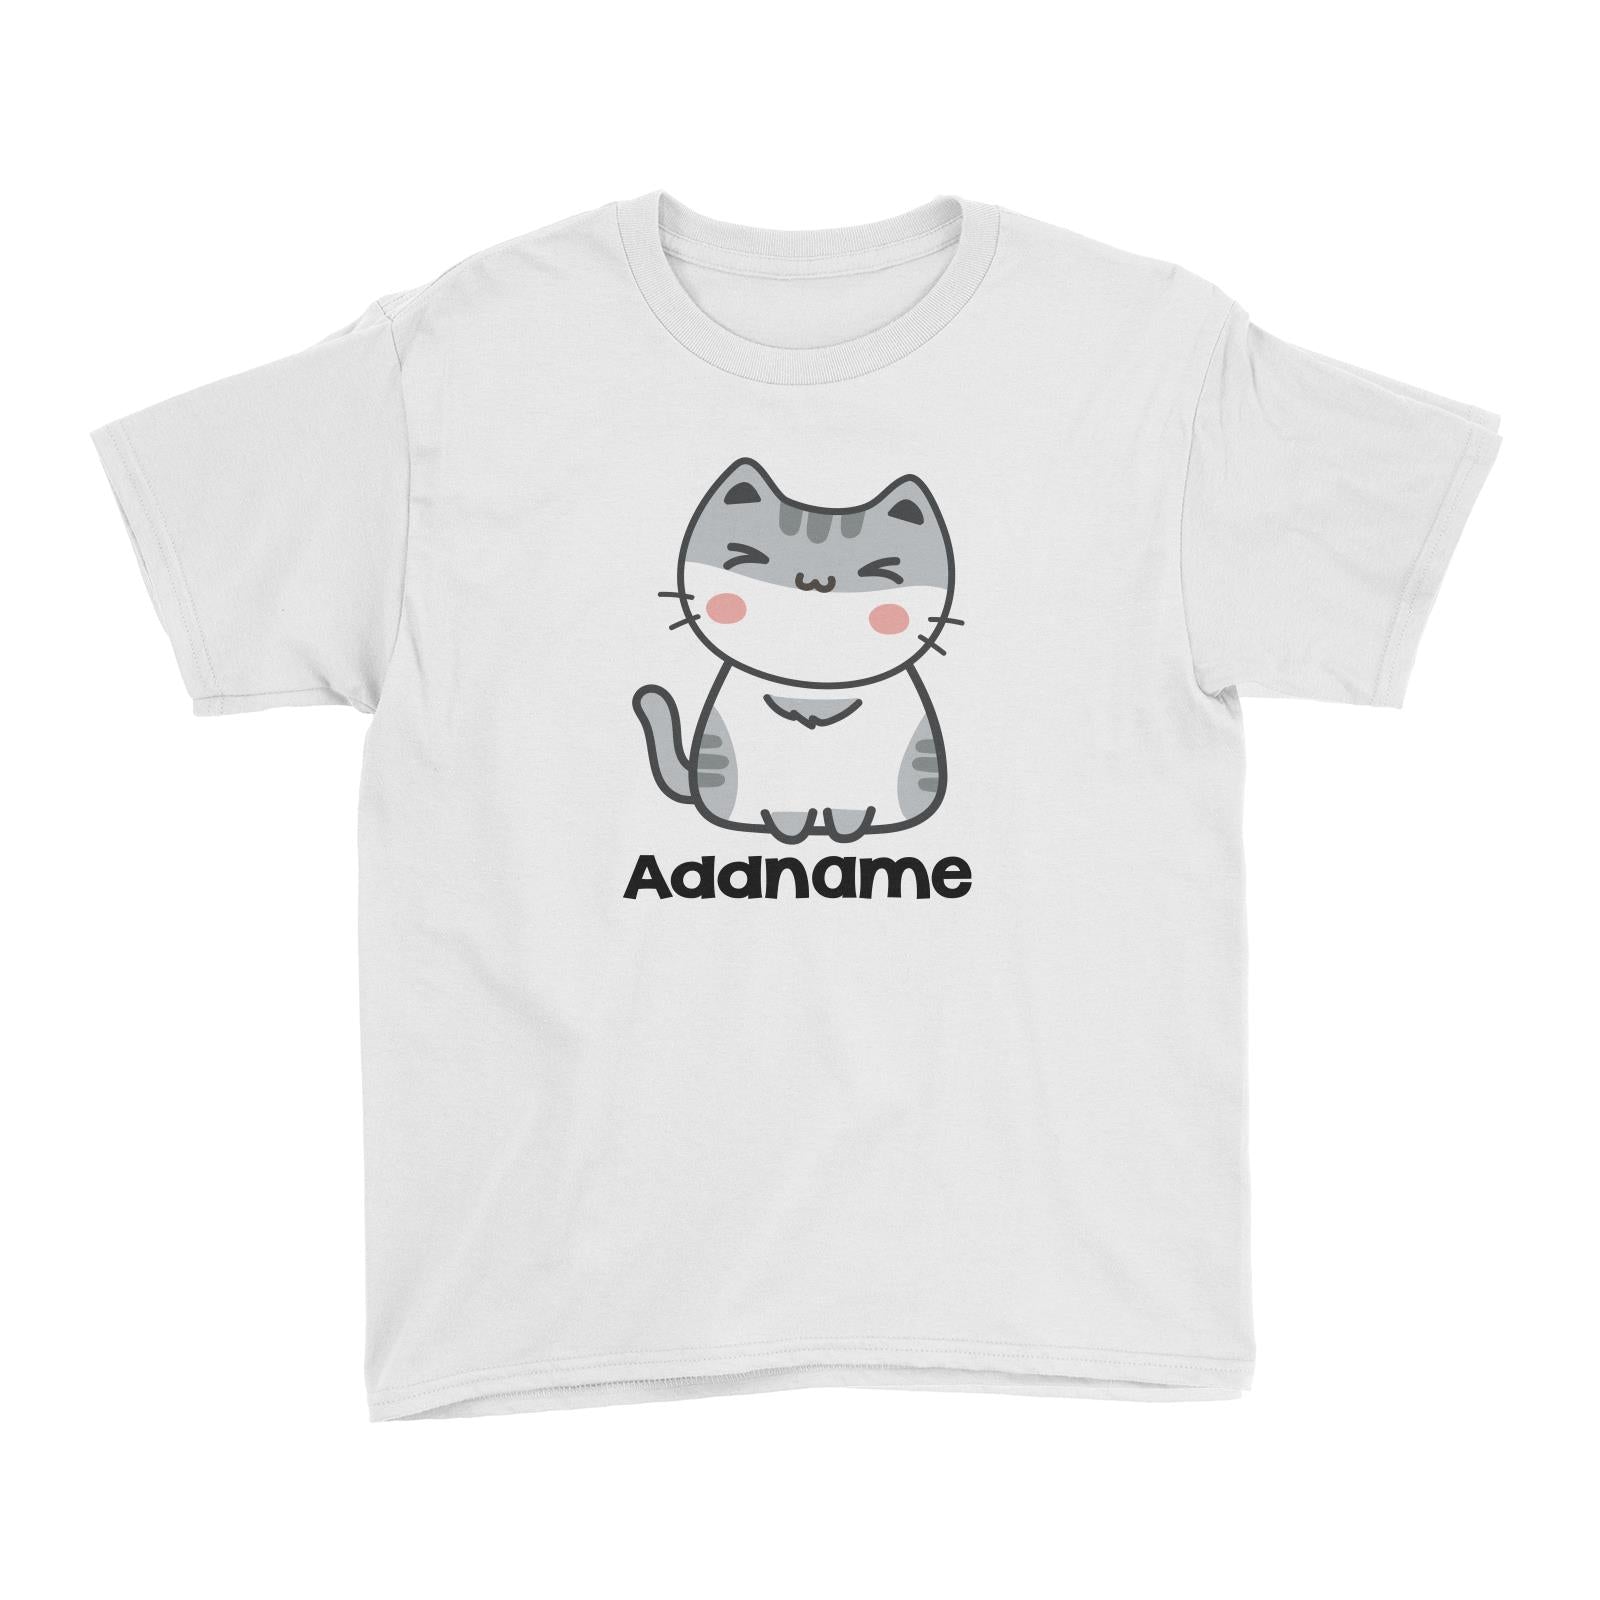 Drawn Adorable Cats White & Grey Addname Kid's T-Shirt